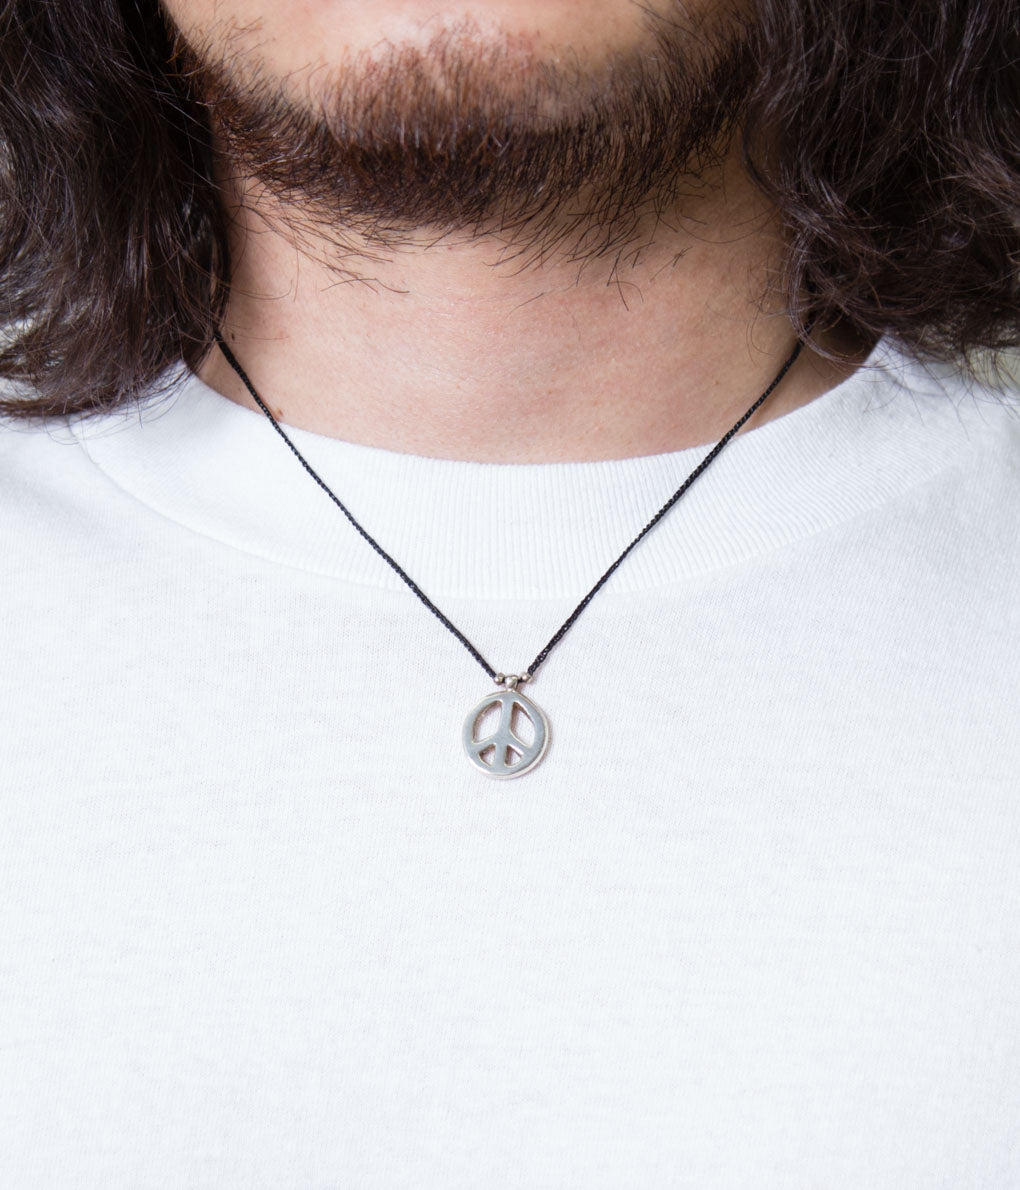 JILL PLATNER SCOUT NECKLACE スカウトネックレス | kensysgas.com